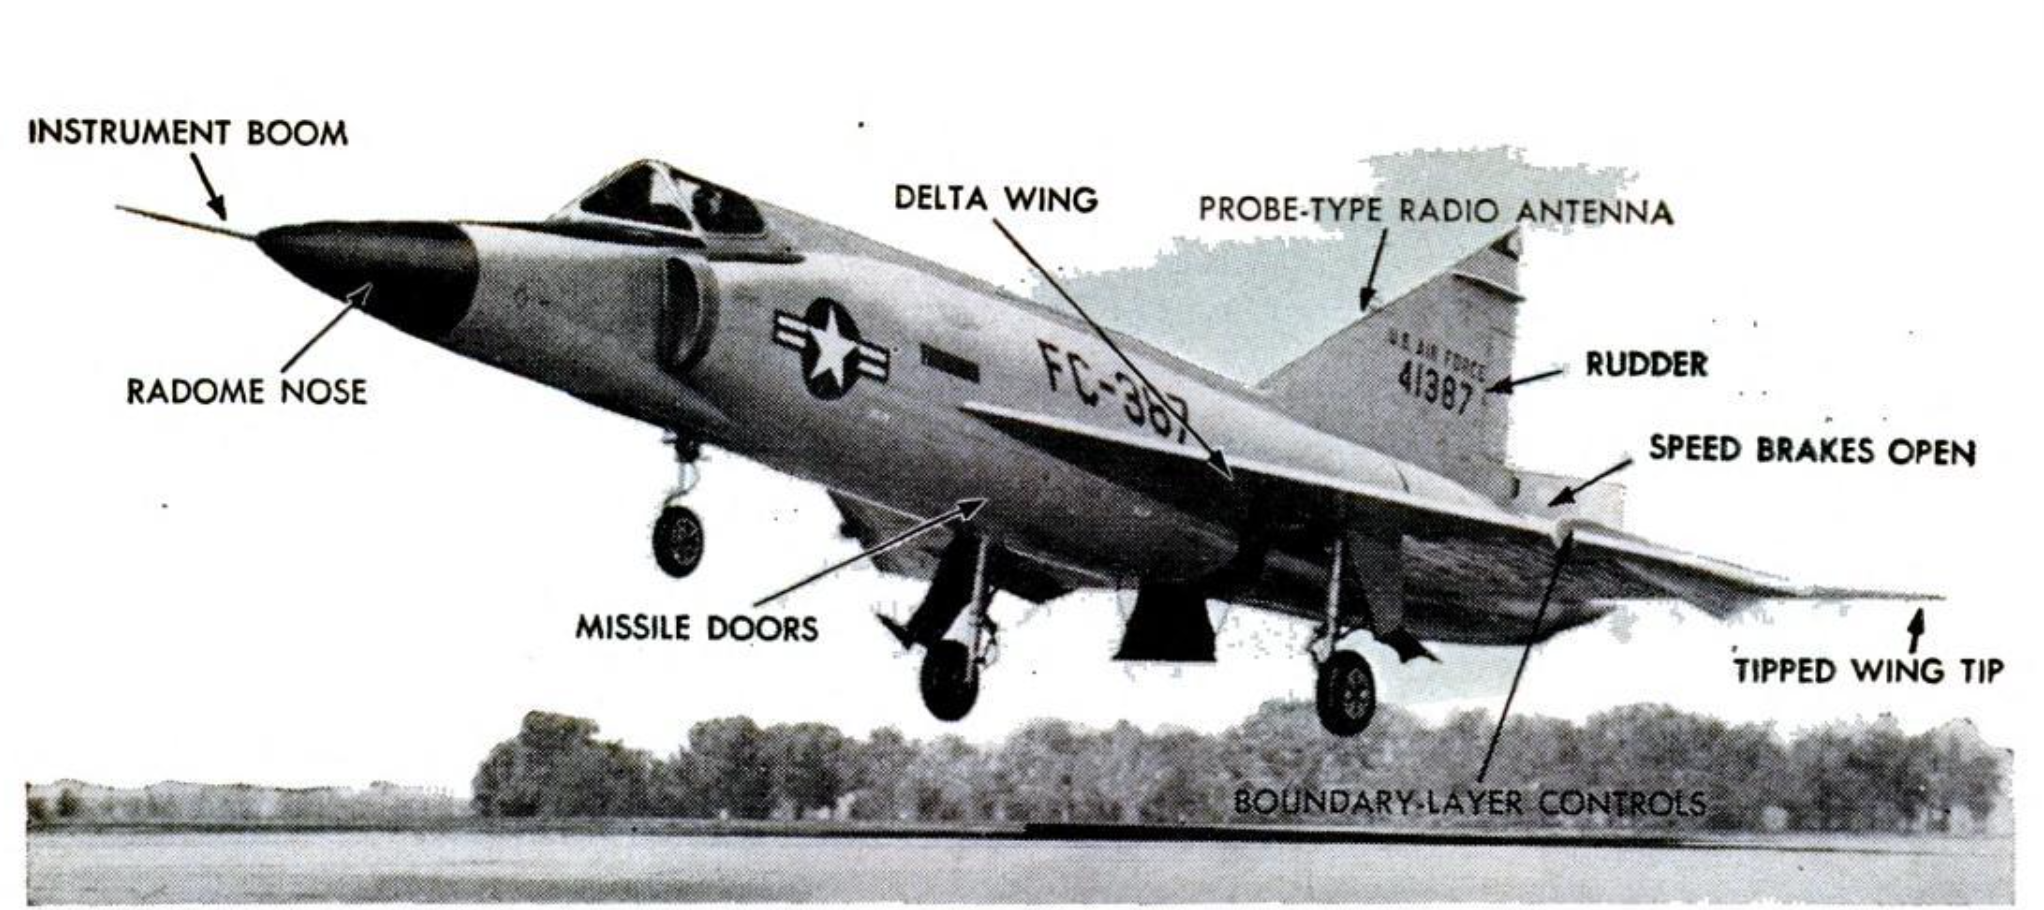 The B-58 and the Era of the Flying Triangles